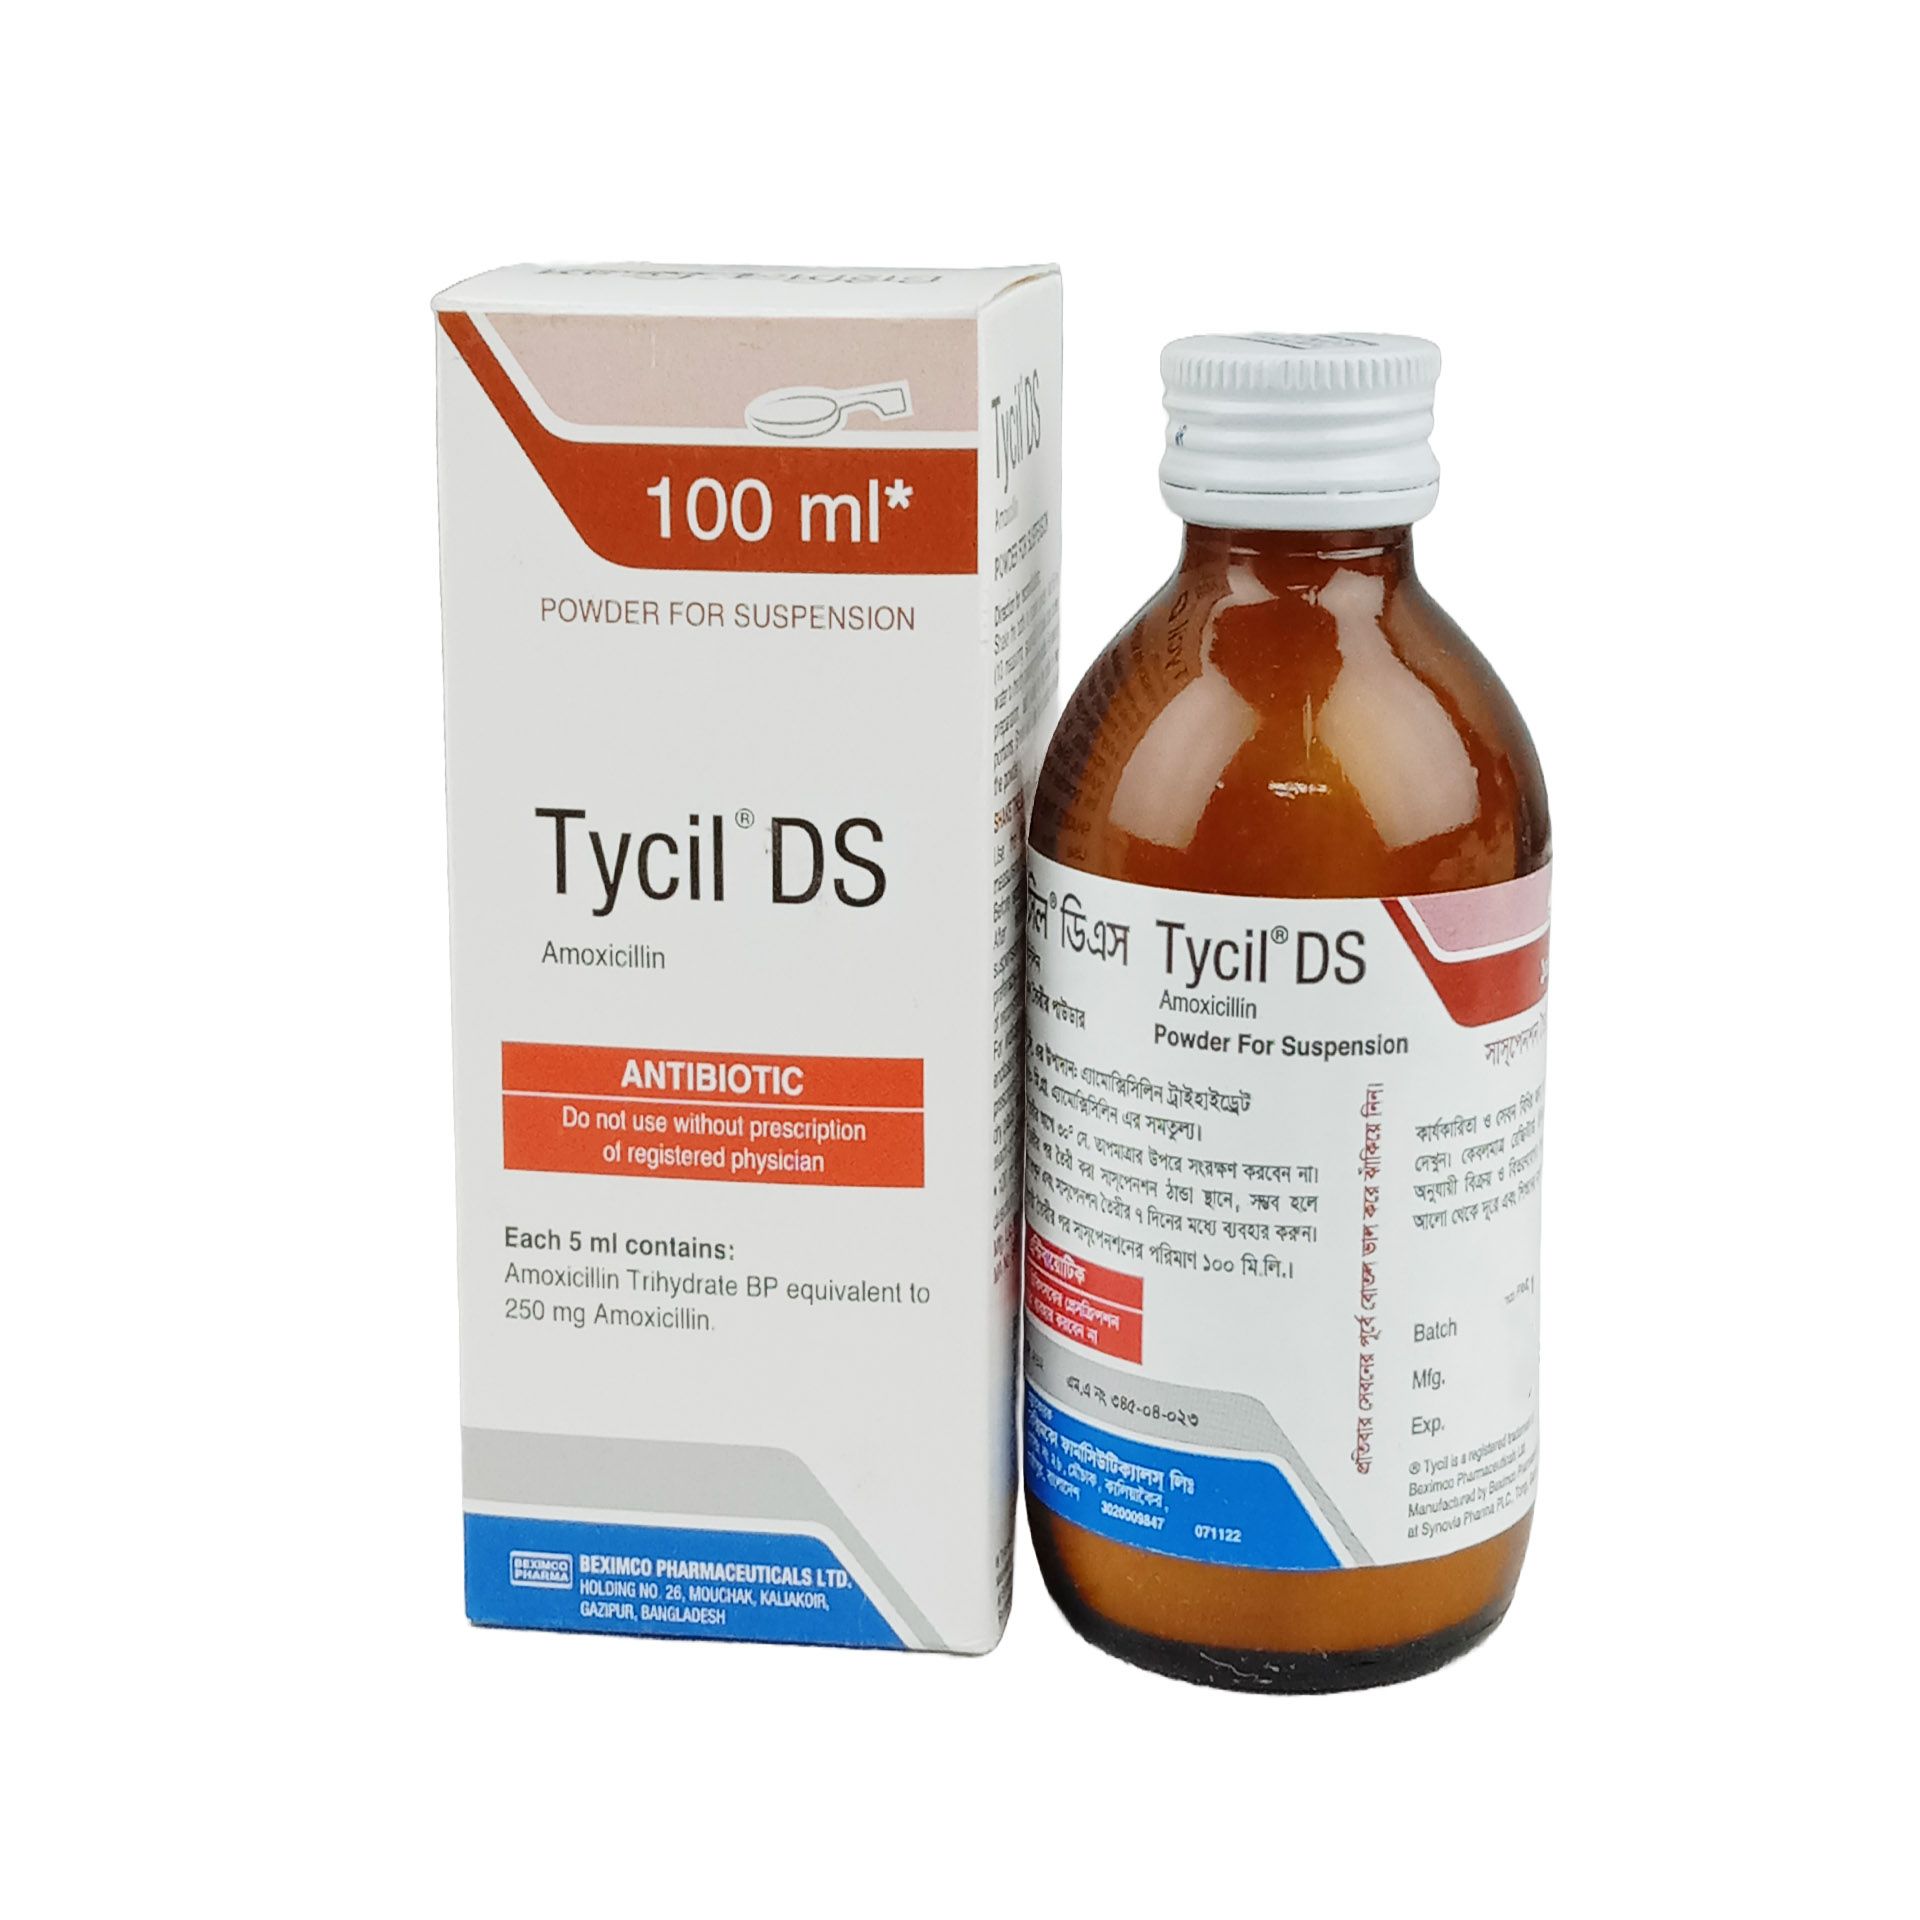 Tycil DS 250mg/5ml Powder for Suspension